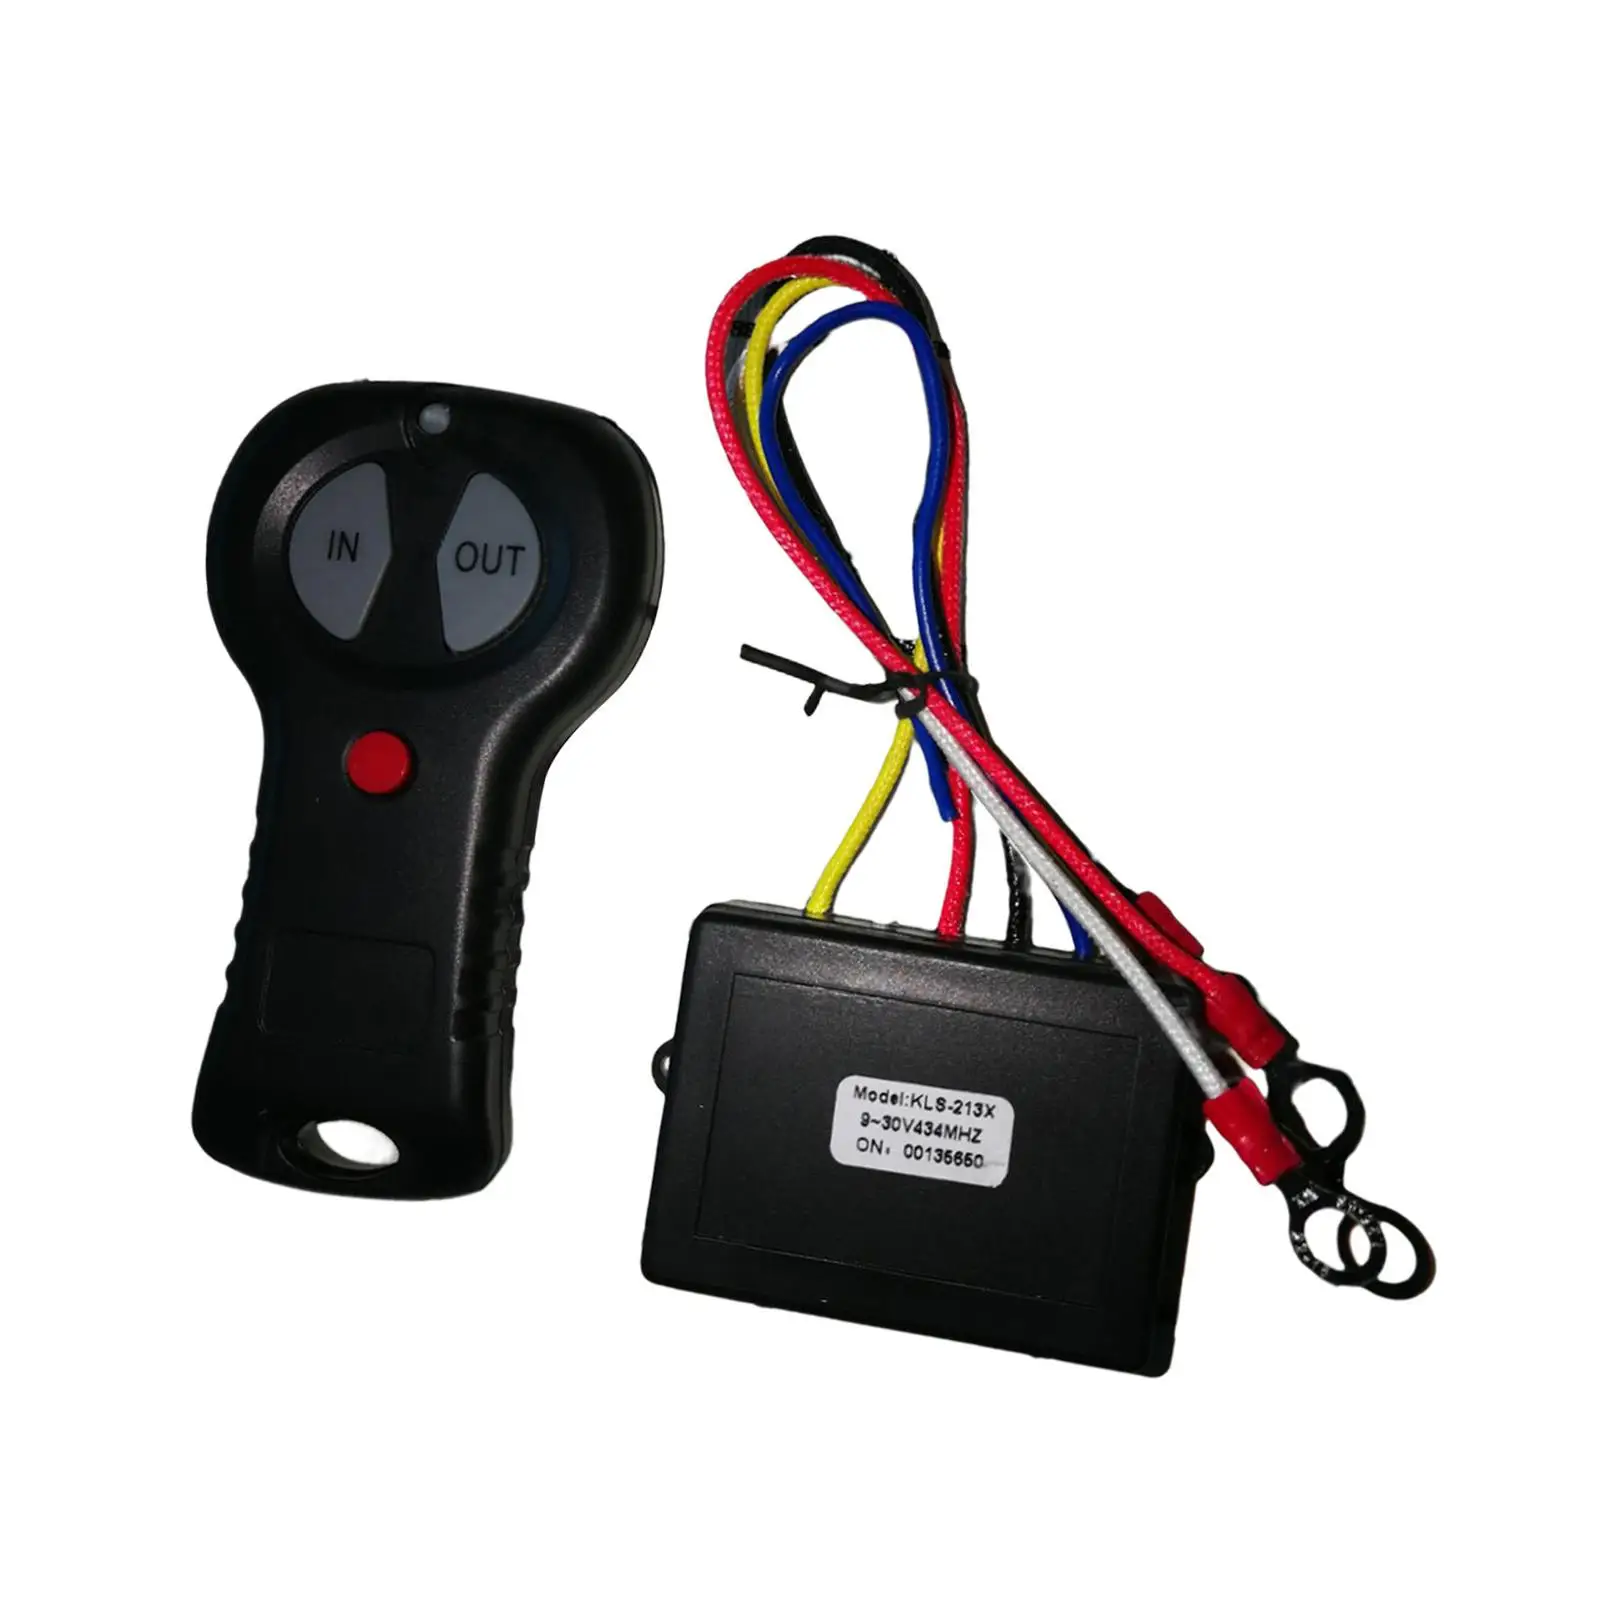 Winch Remote Control with Indicator Light Waterproof for Dump Trailer